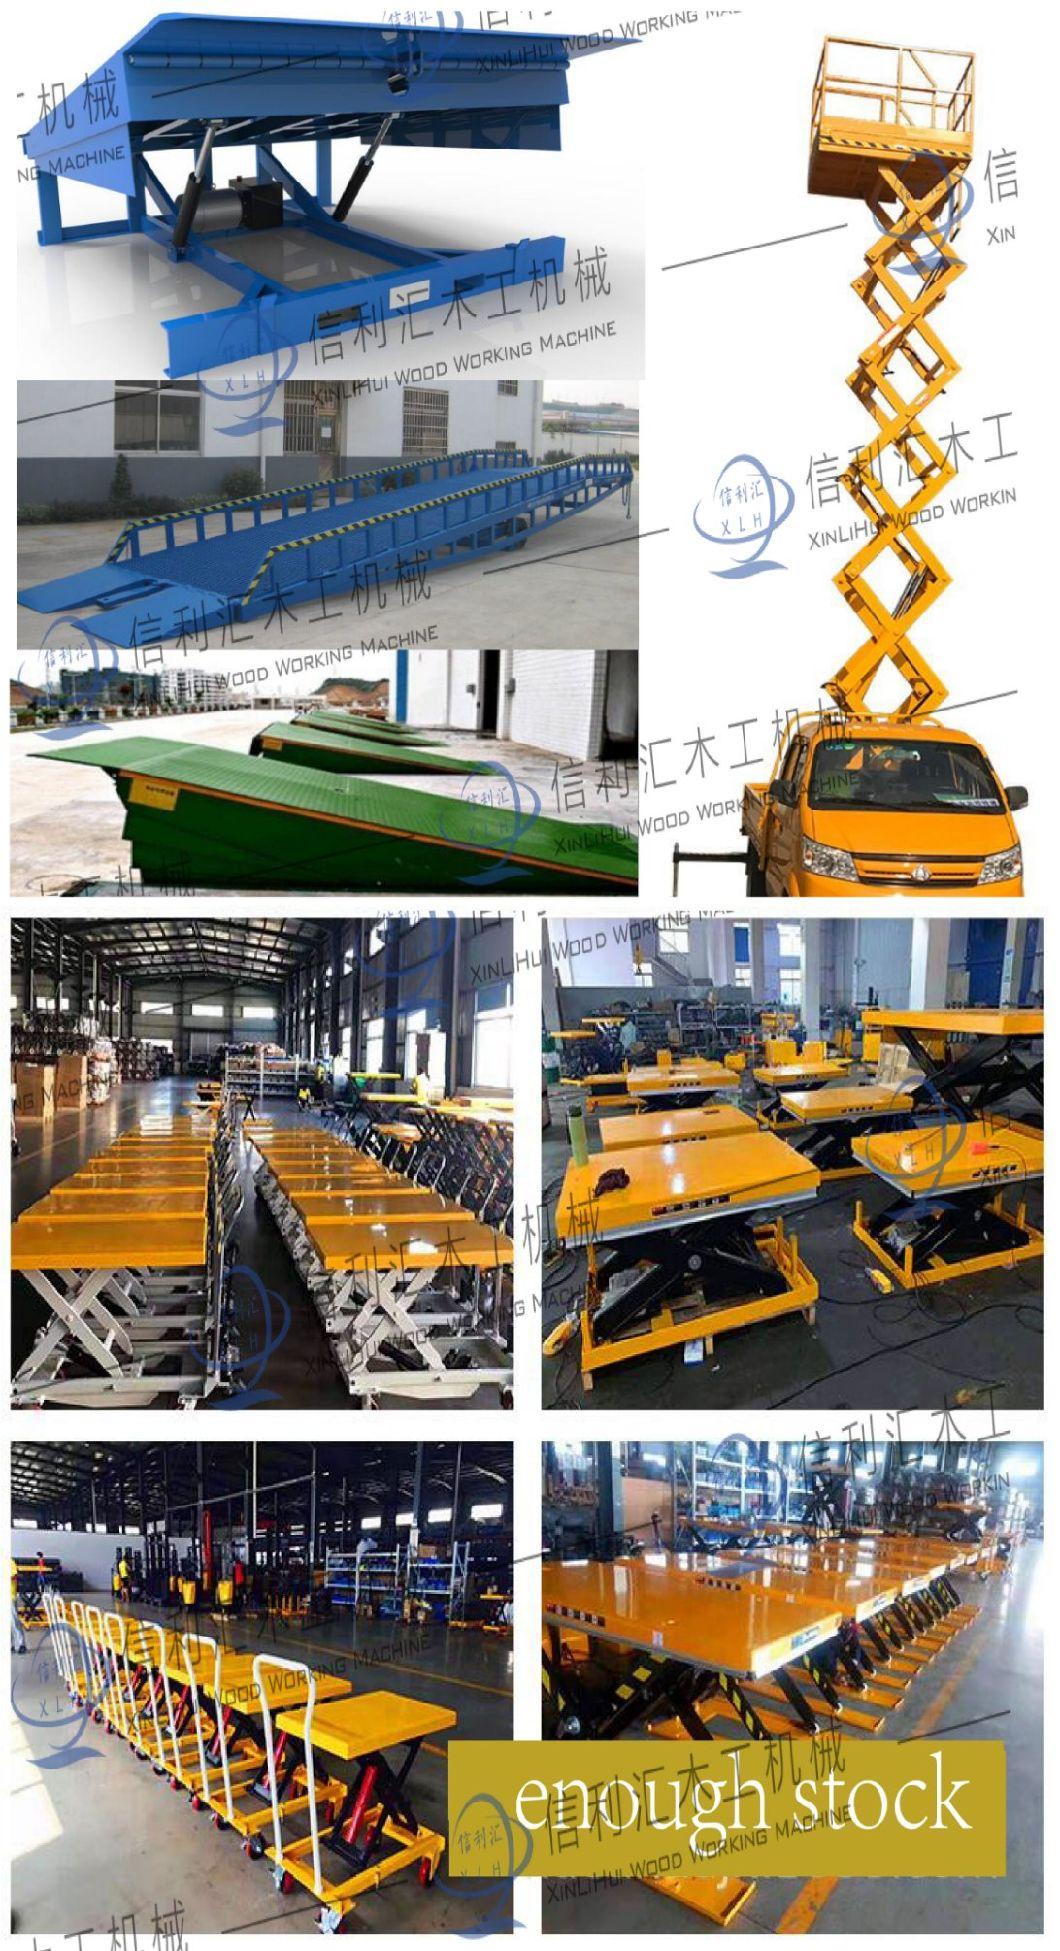 Quote of Sccisor Parking Lift with These Spechs: 440 Cms Length, 250 Cms Width, 240 Cms Higth, Capacity 3 Tons,